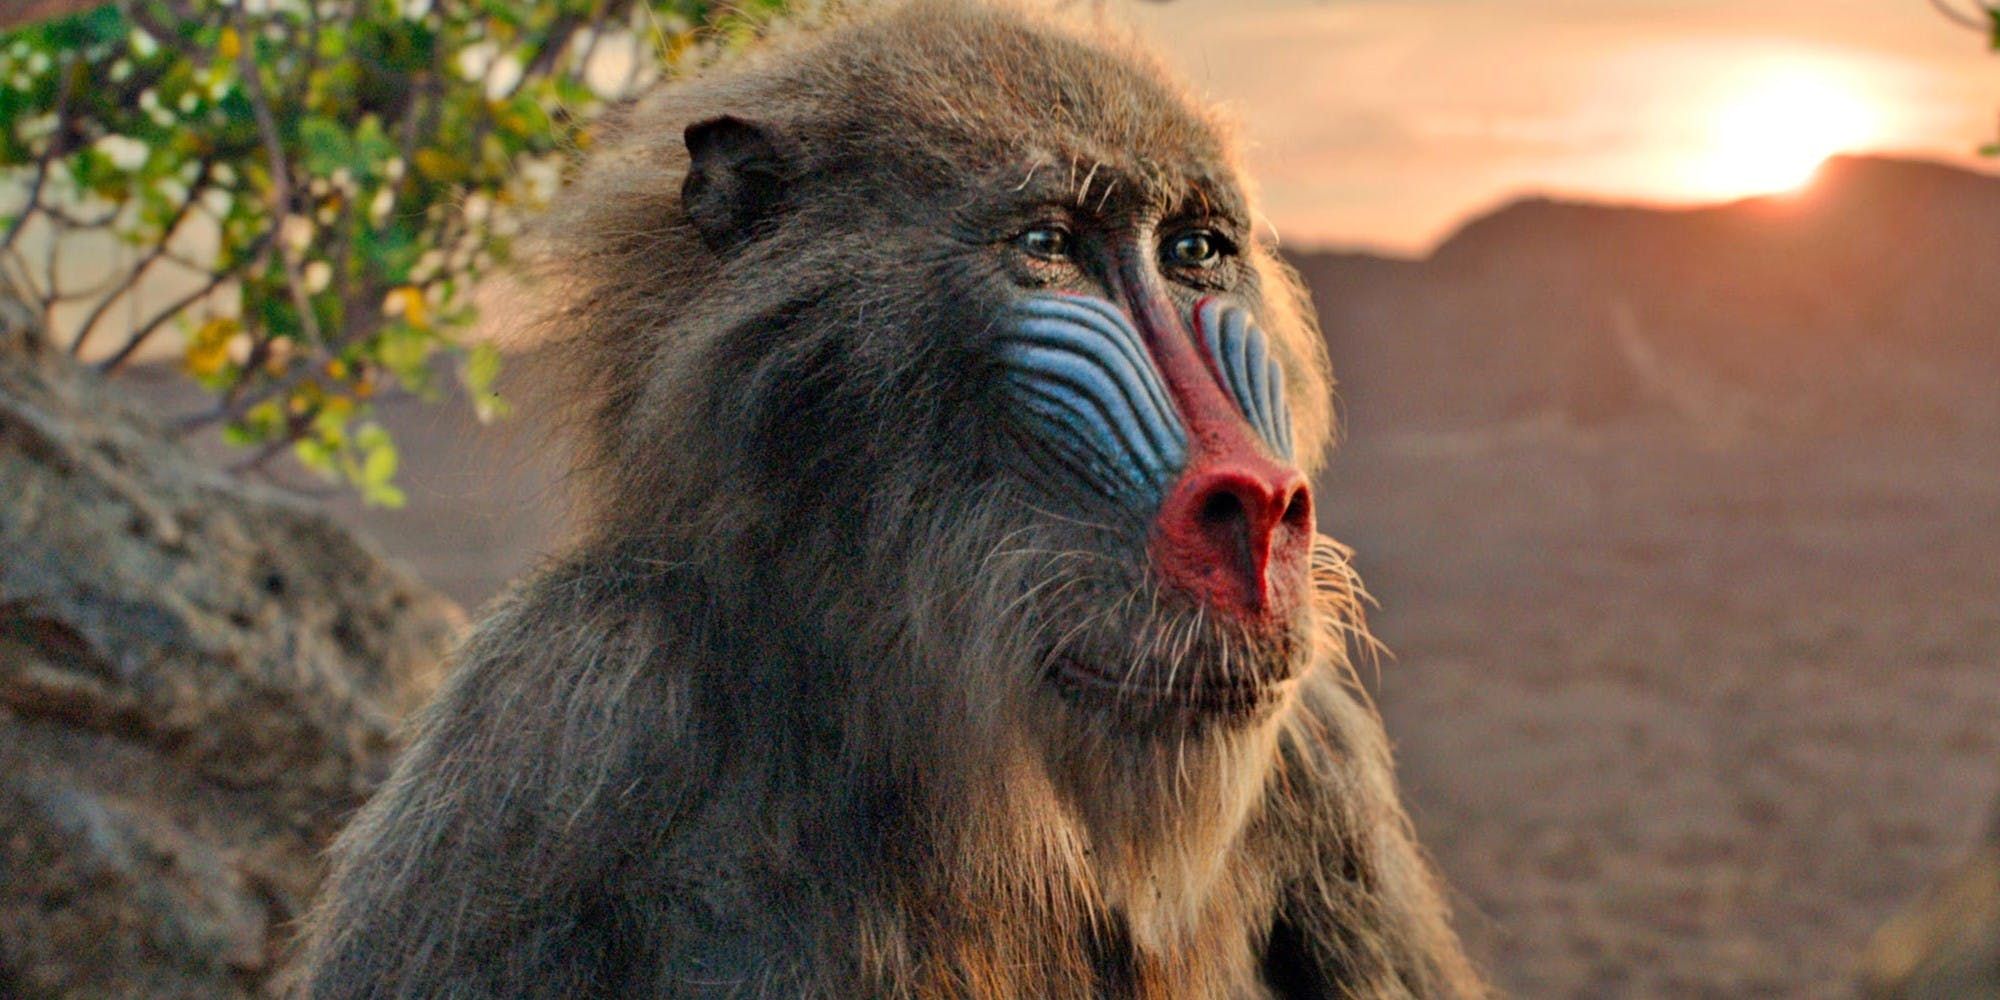 live action rafiki from the lion king